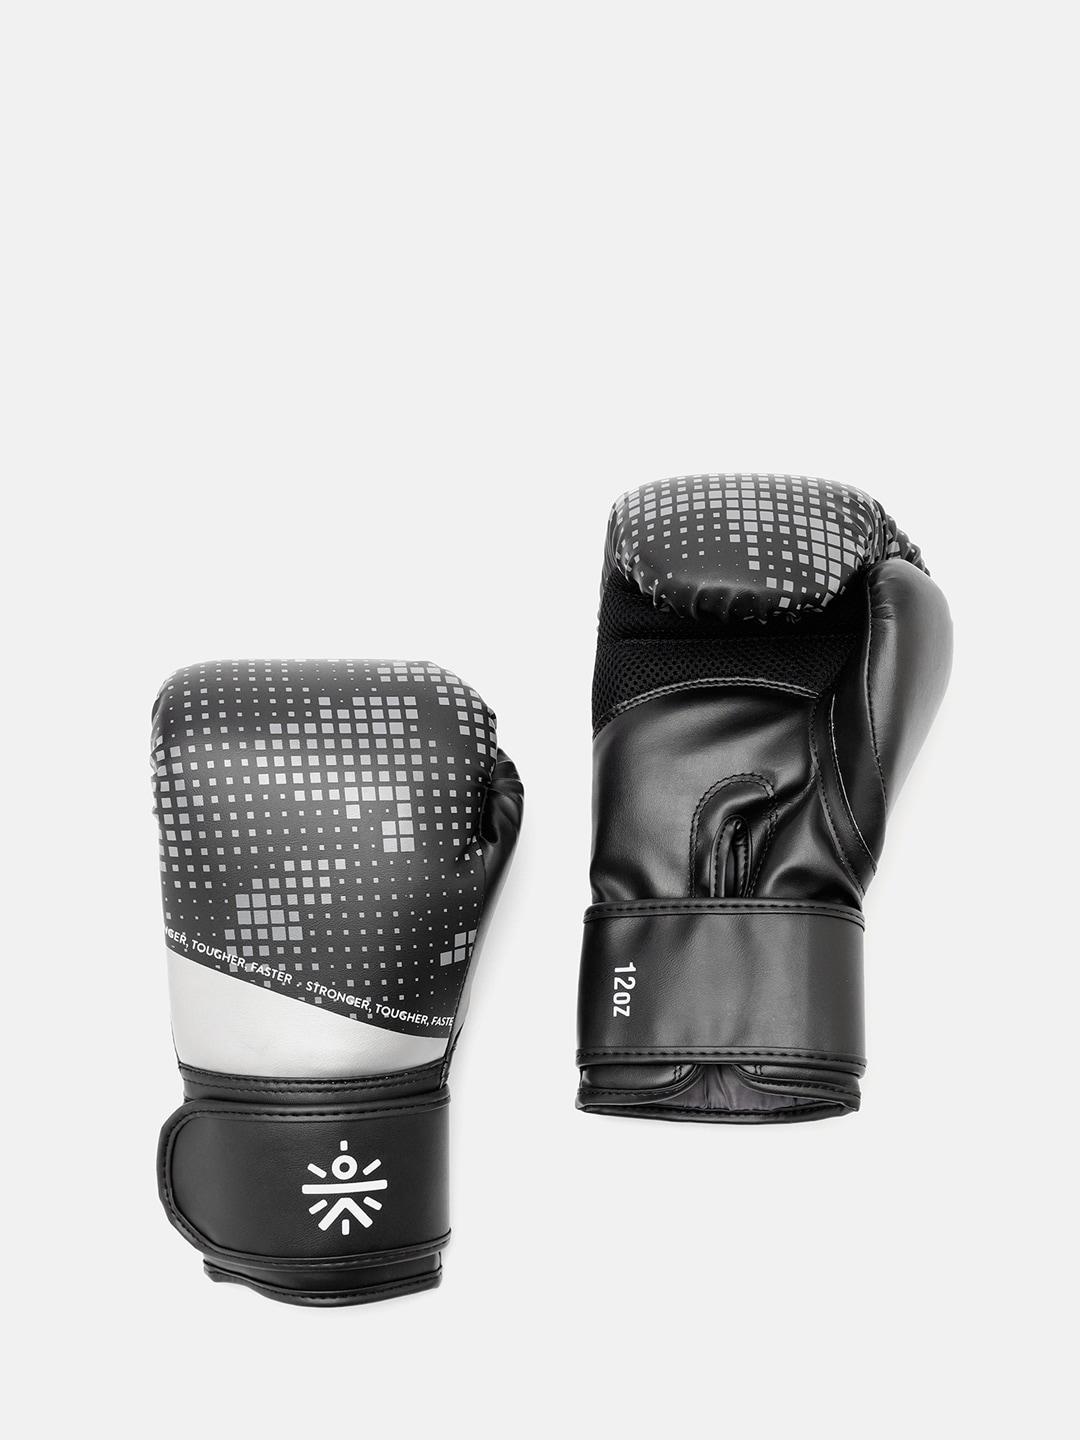 cultsportone printed antimicrobial boxing gloves